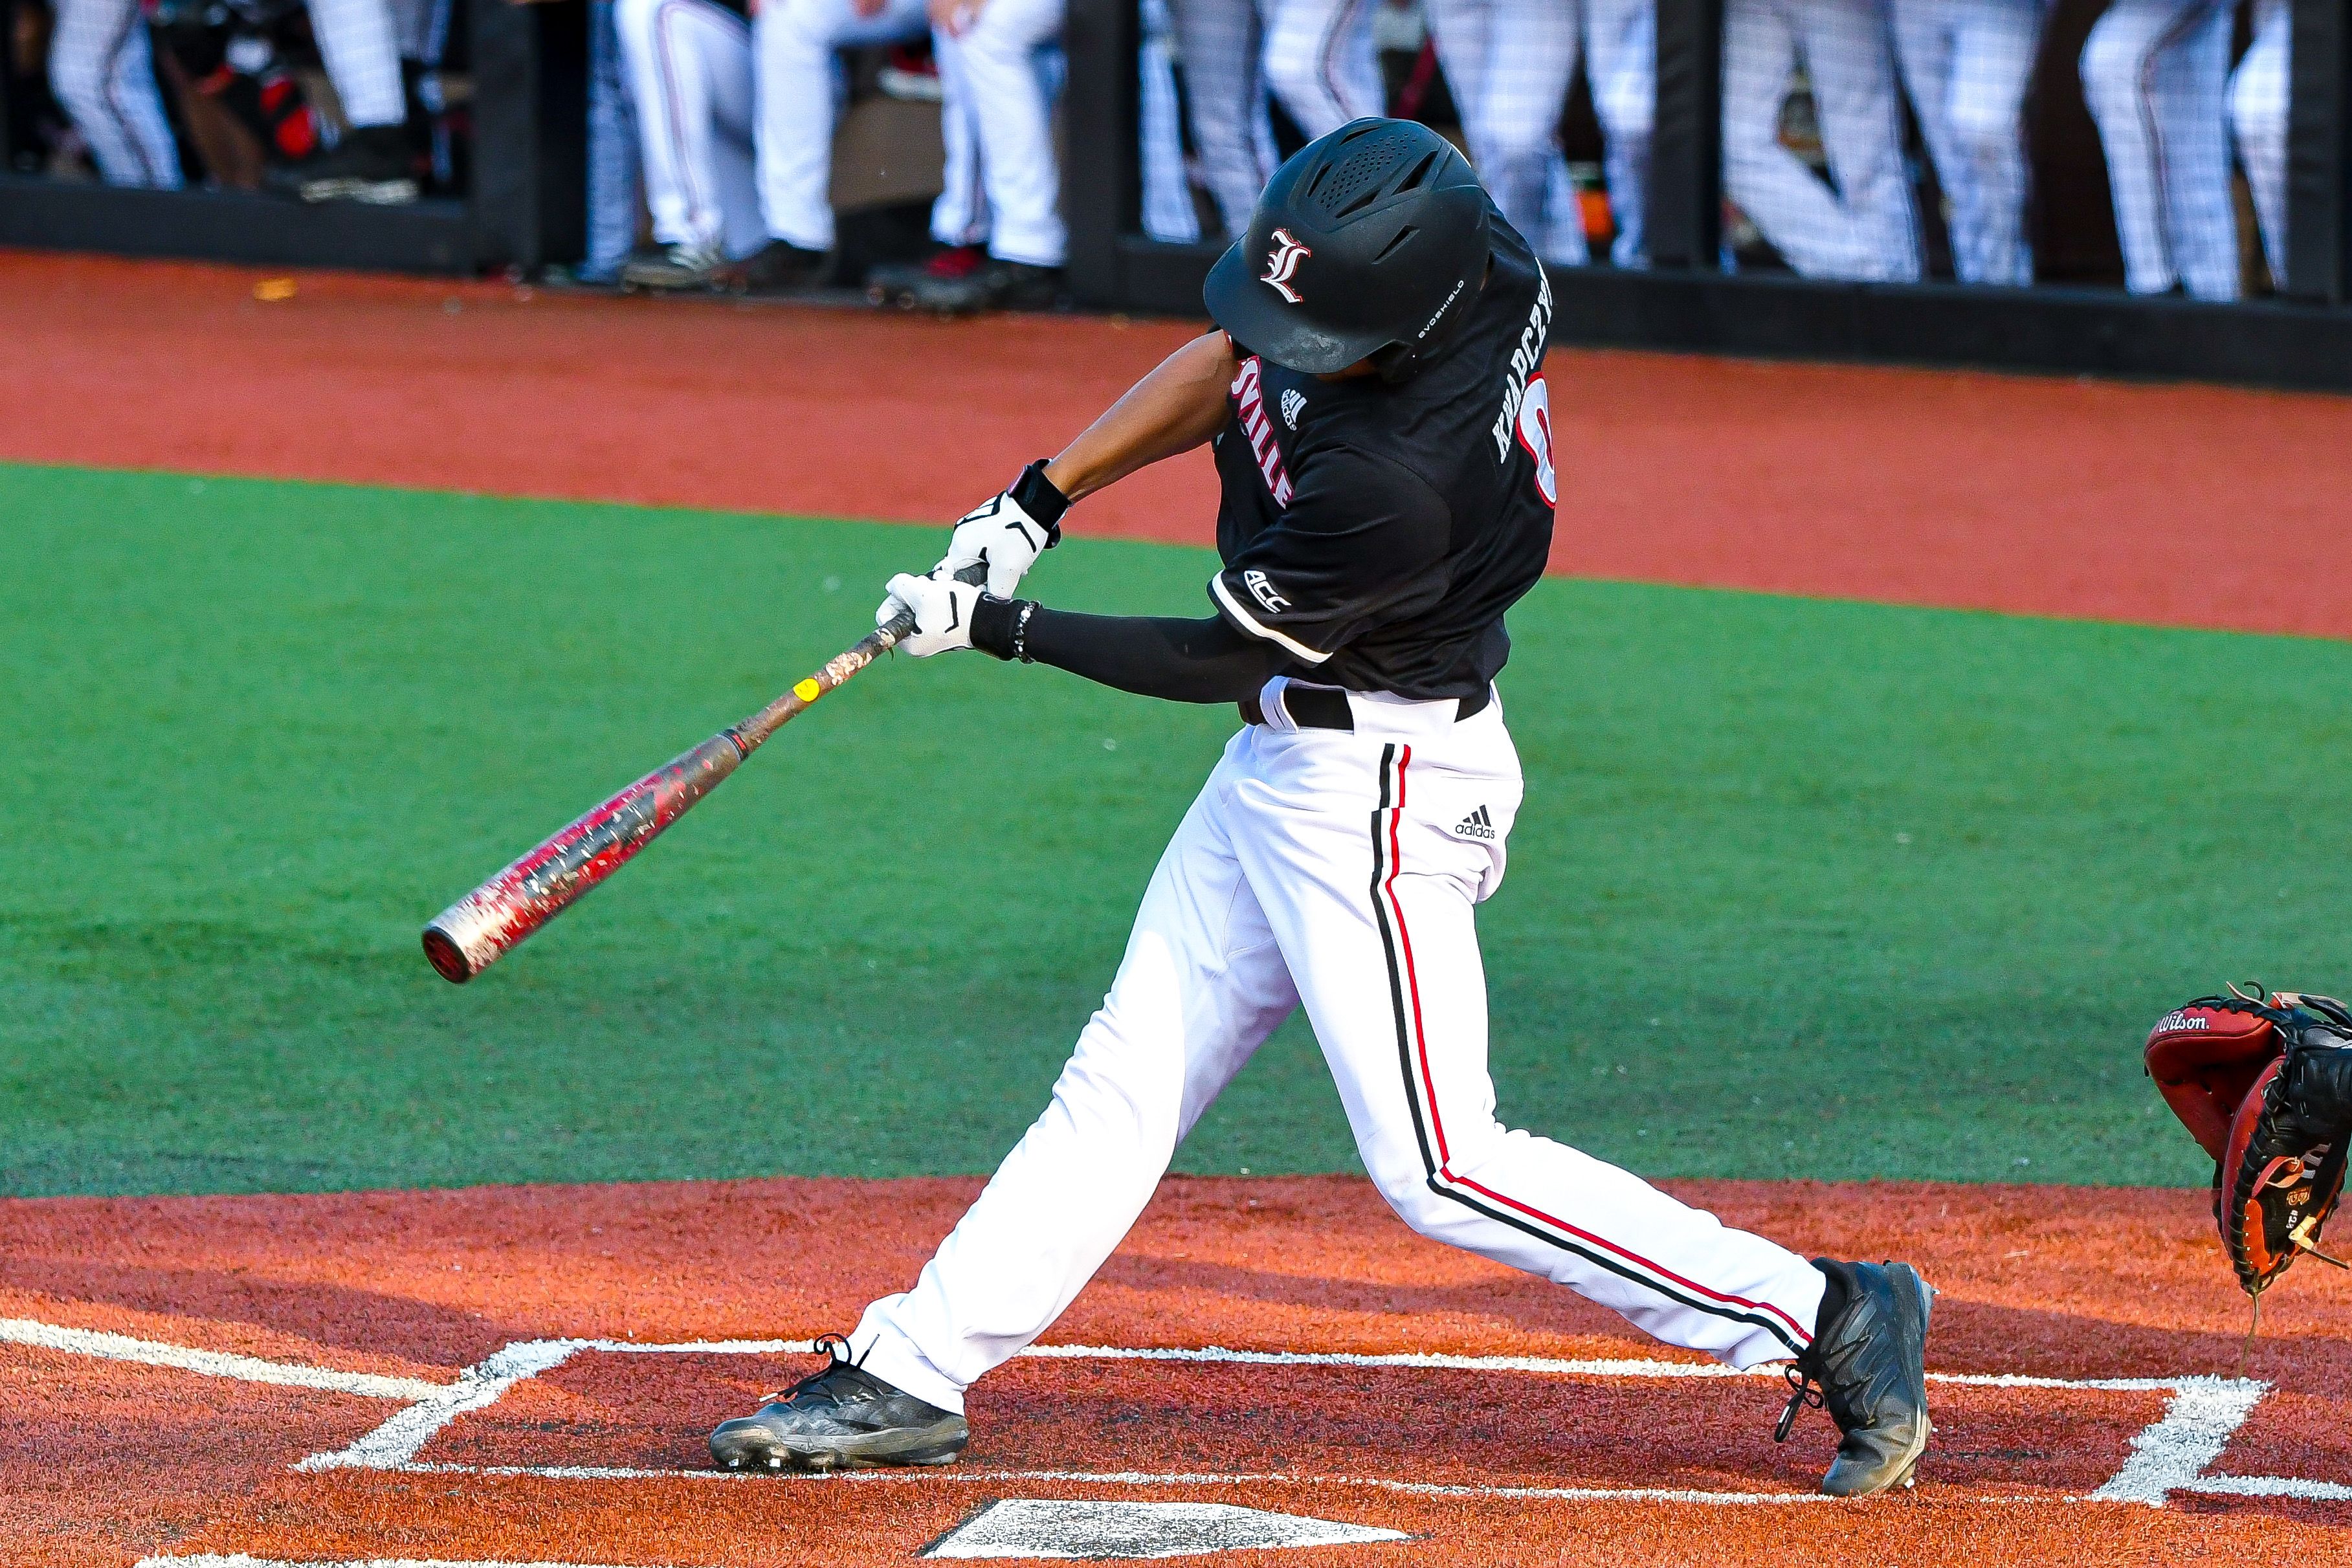 U of L baseball walks away with a loss against Florida State – The